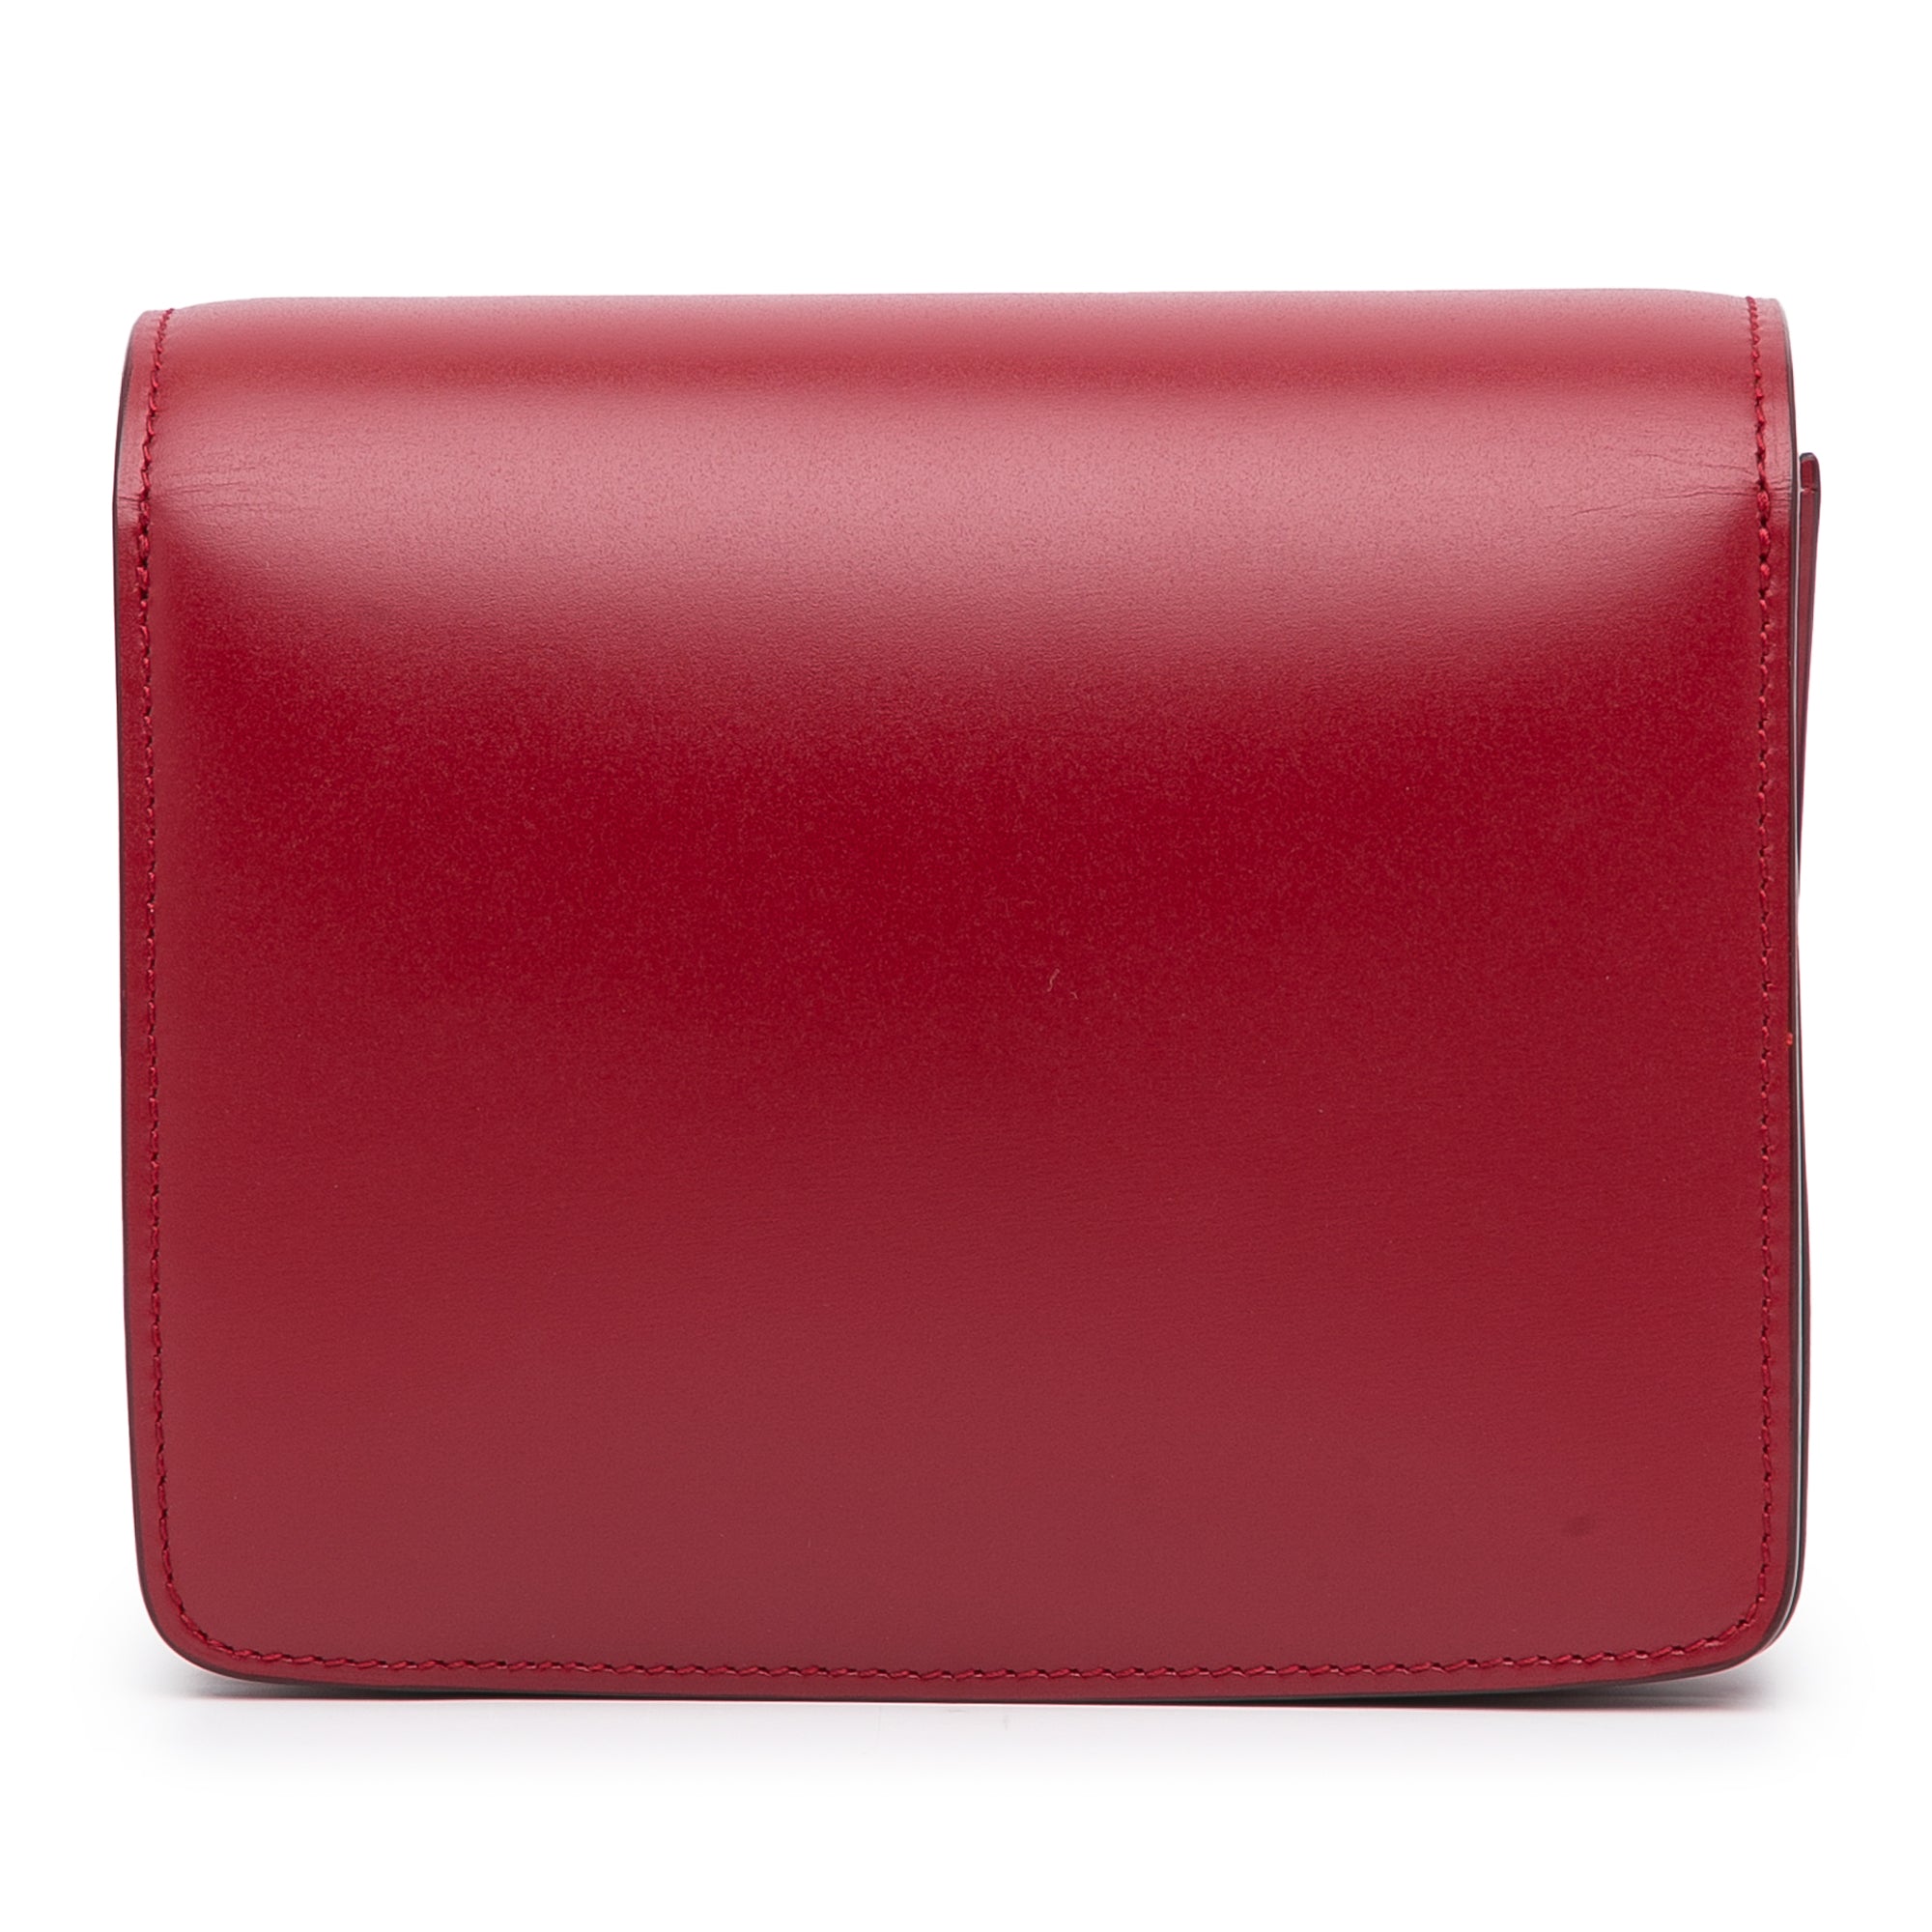 Celine Red Leather C Wallet on Chain Crossbody Bag